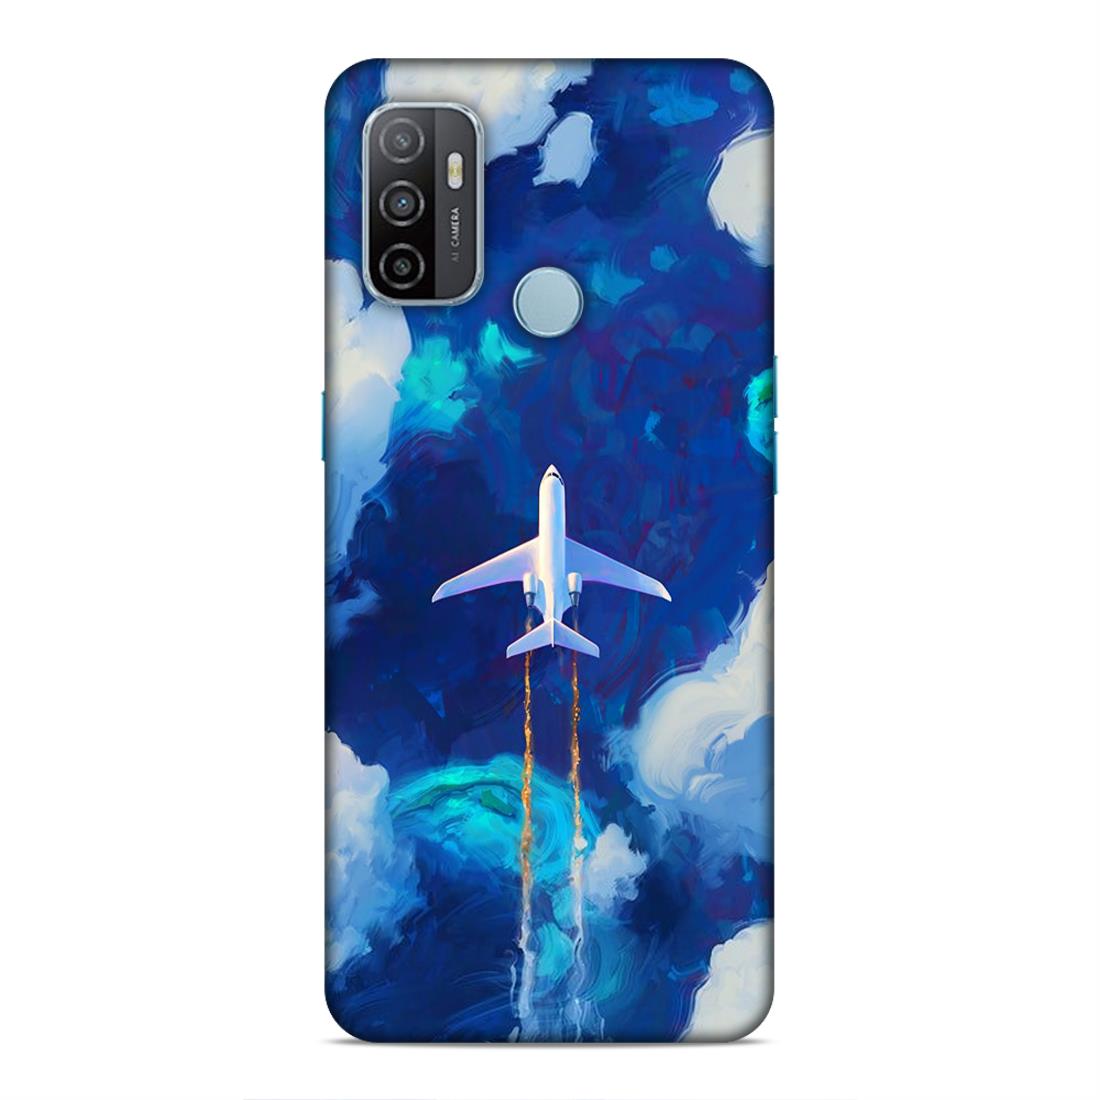 Aeroplane In The Sky Hard Back Case For Oppo A33 2020 / A53 2020